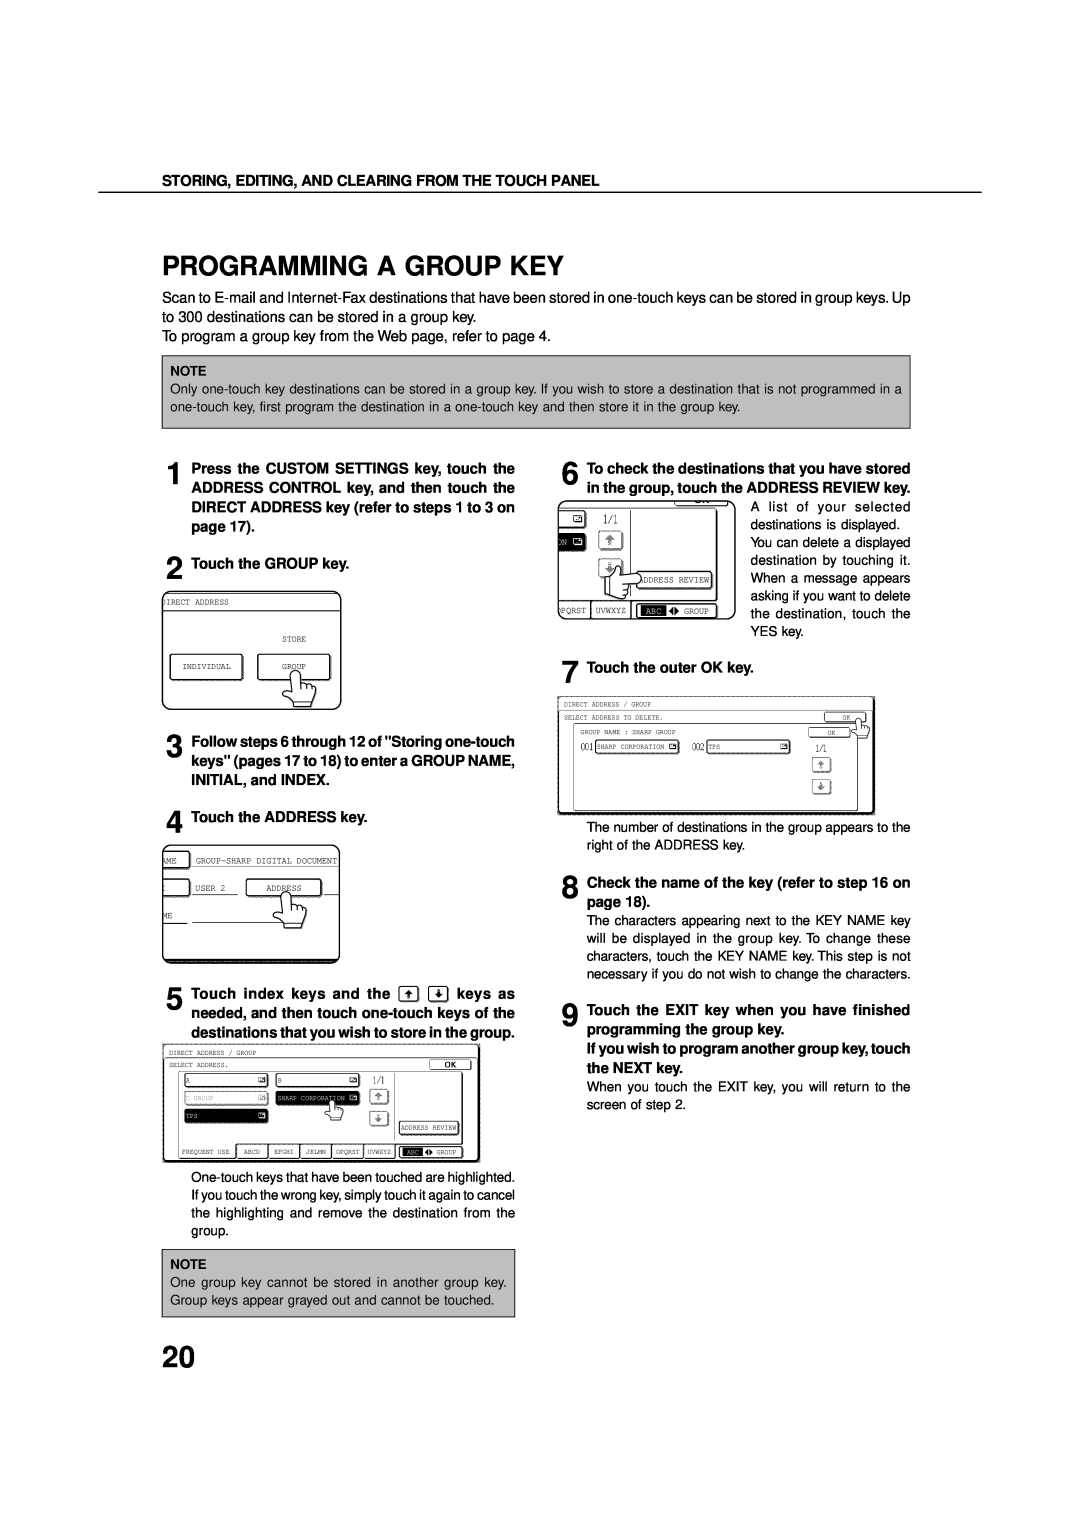 Sharp 4501, 4500, 450M, 3501 Programming A Group Key, DIRECT ADDRESS key refer to steps 1 to 3 on page, Touch the GROUP key 